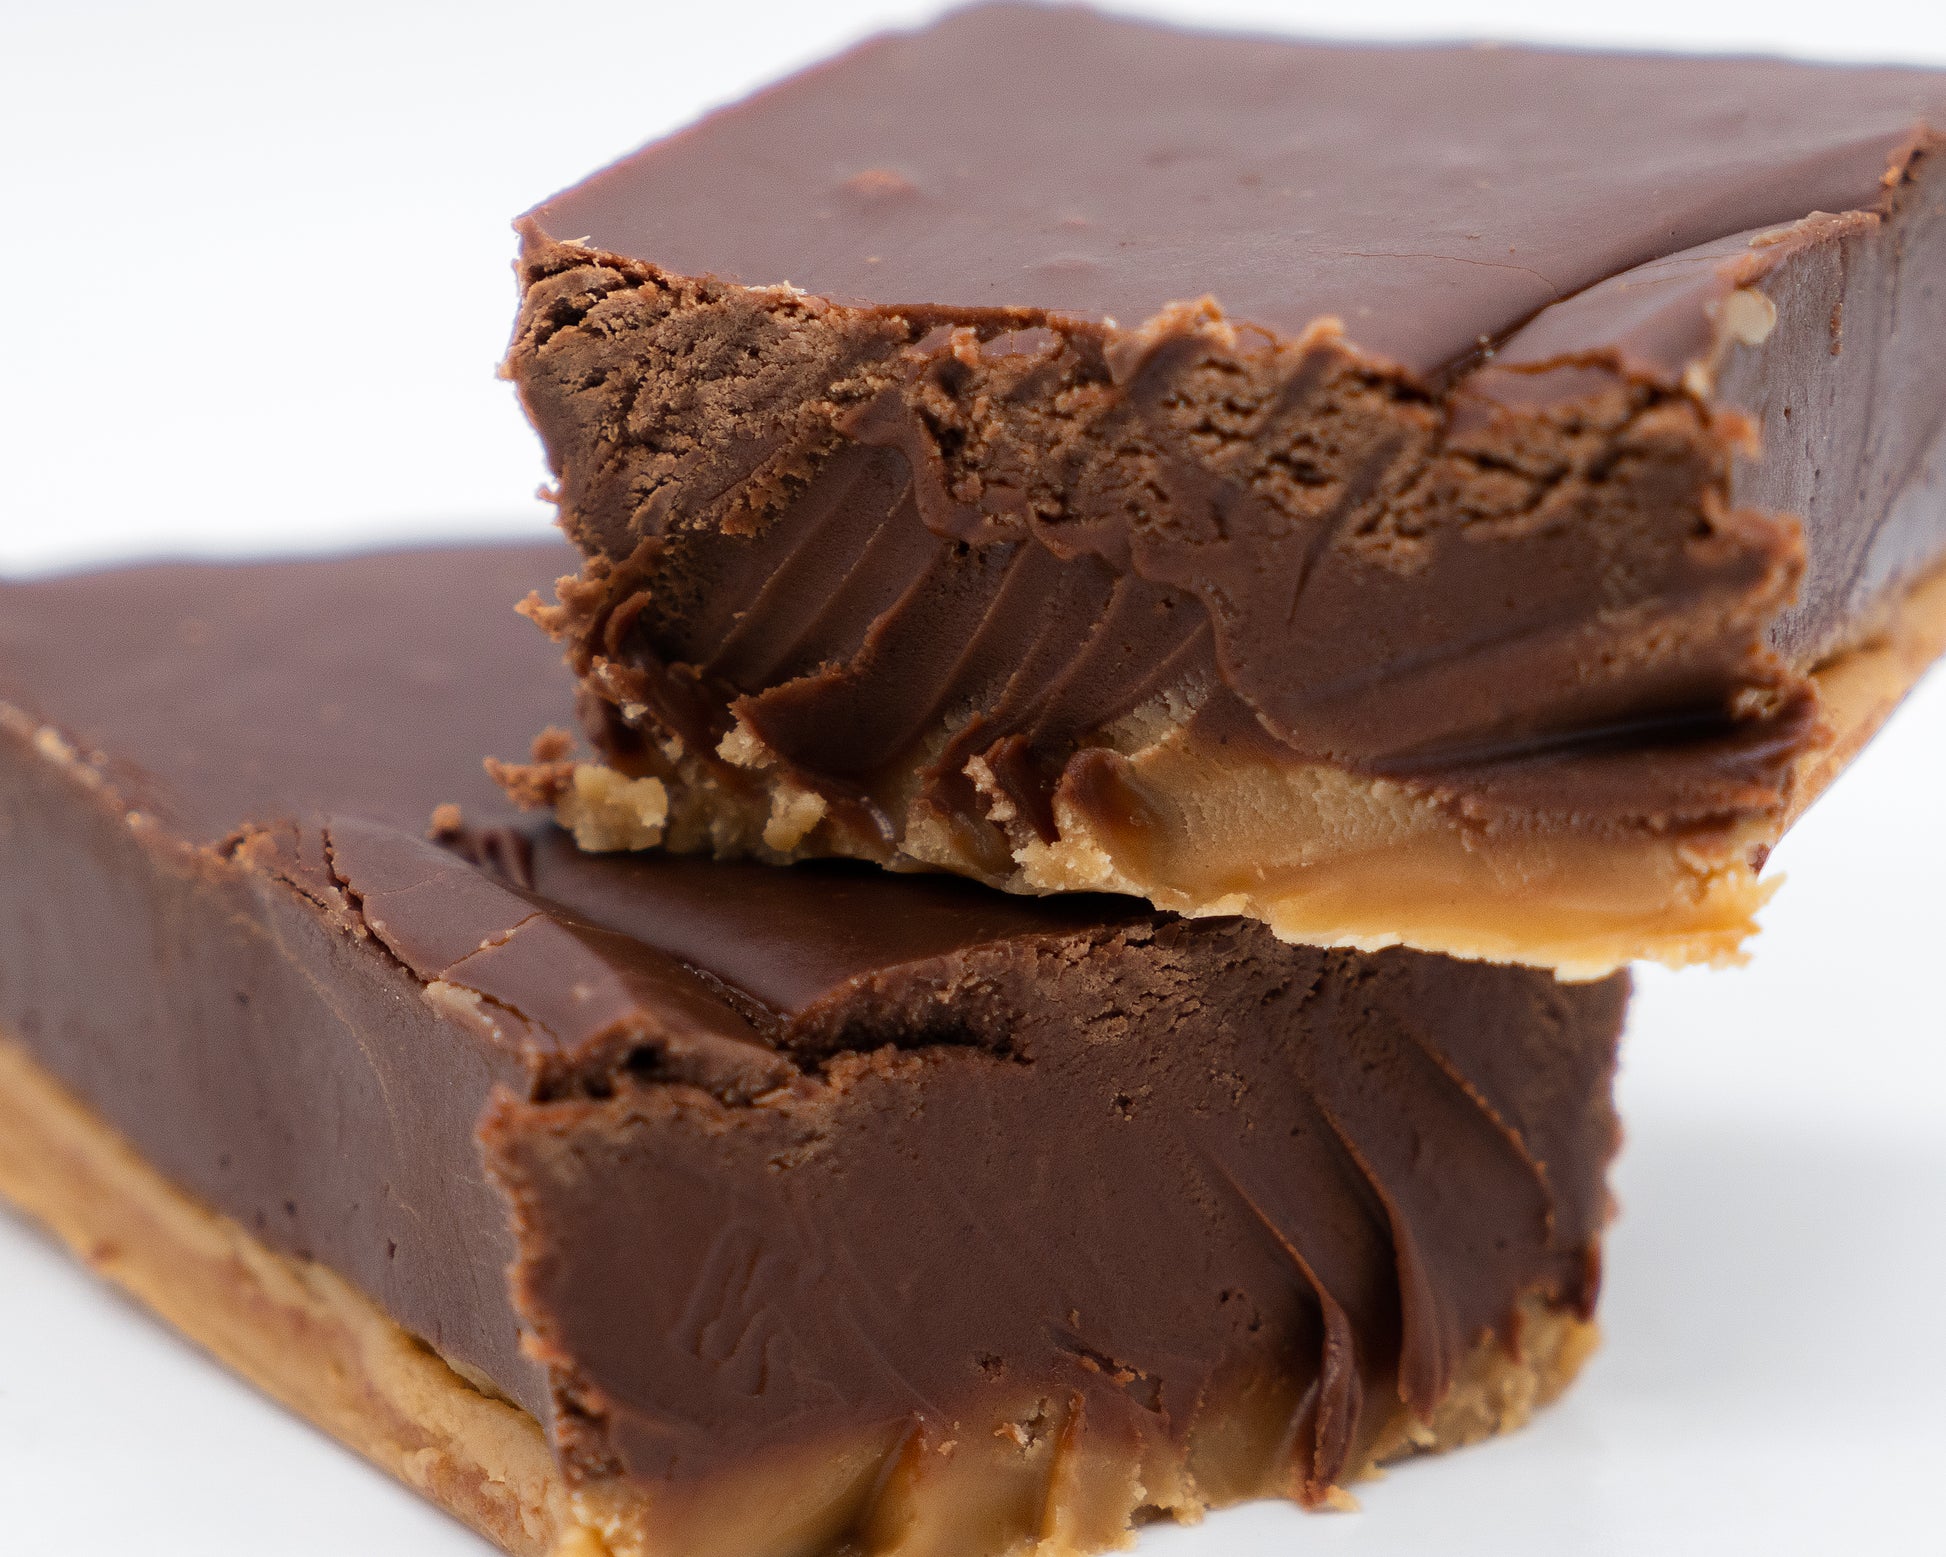 Chocolate Peanut Butter Fudge made in small batches from Stage Stop Candy in Dennis, MA